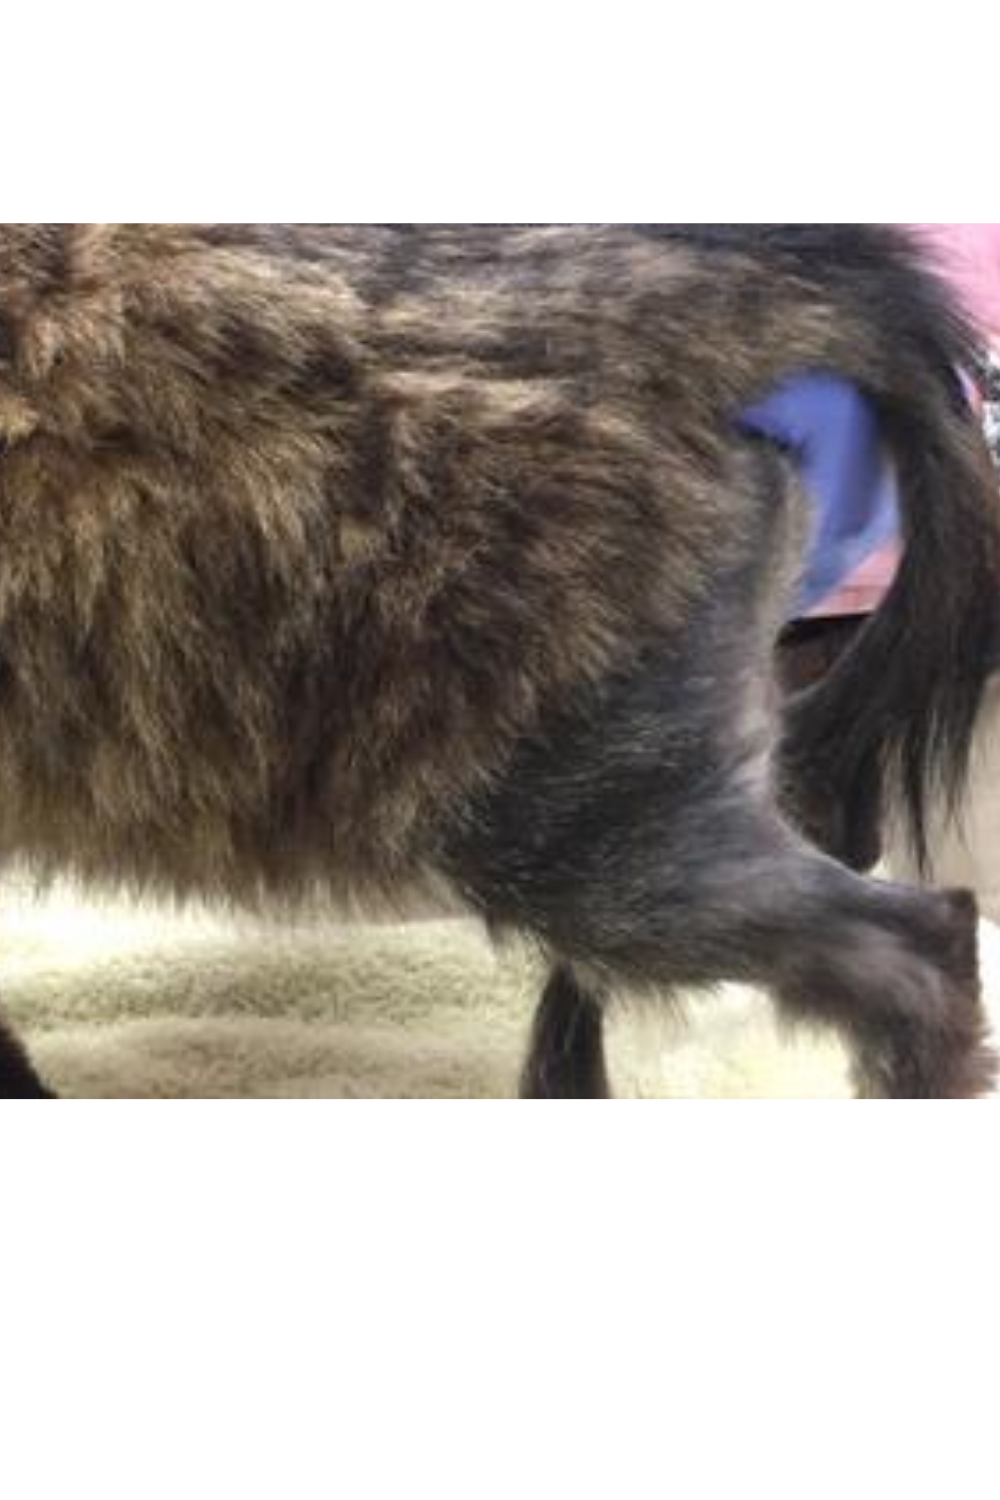 Pattern of hair loss in a cat with flea allergy